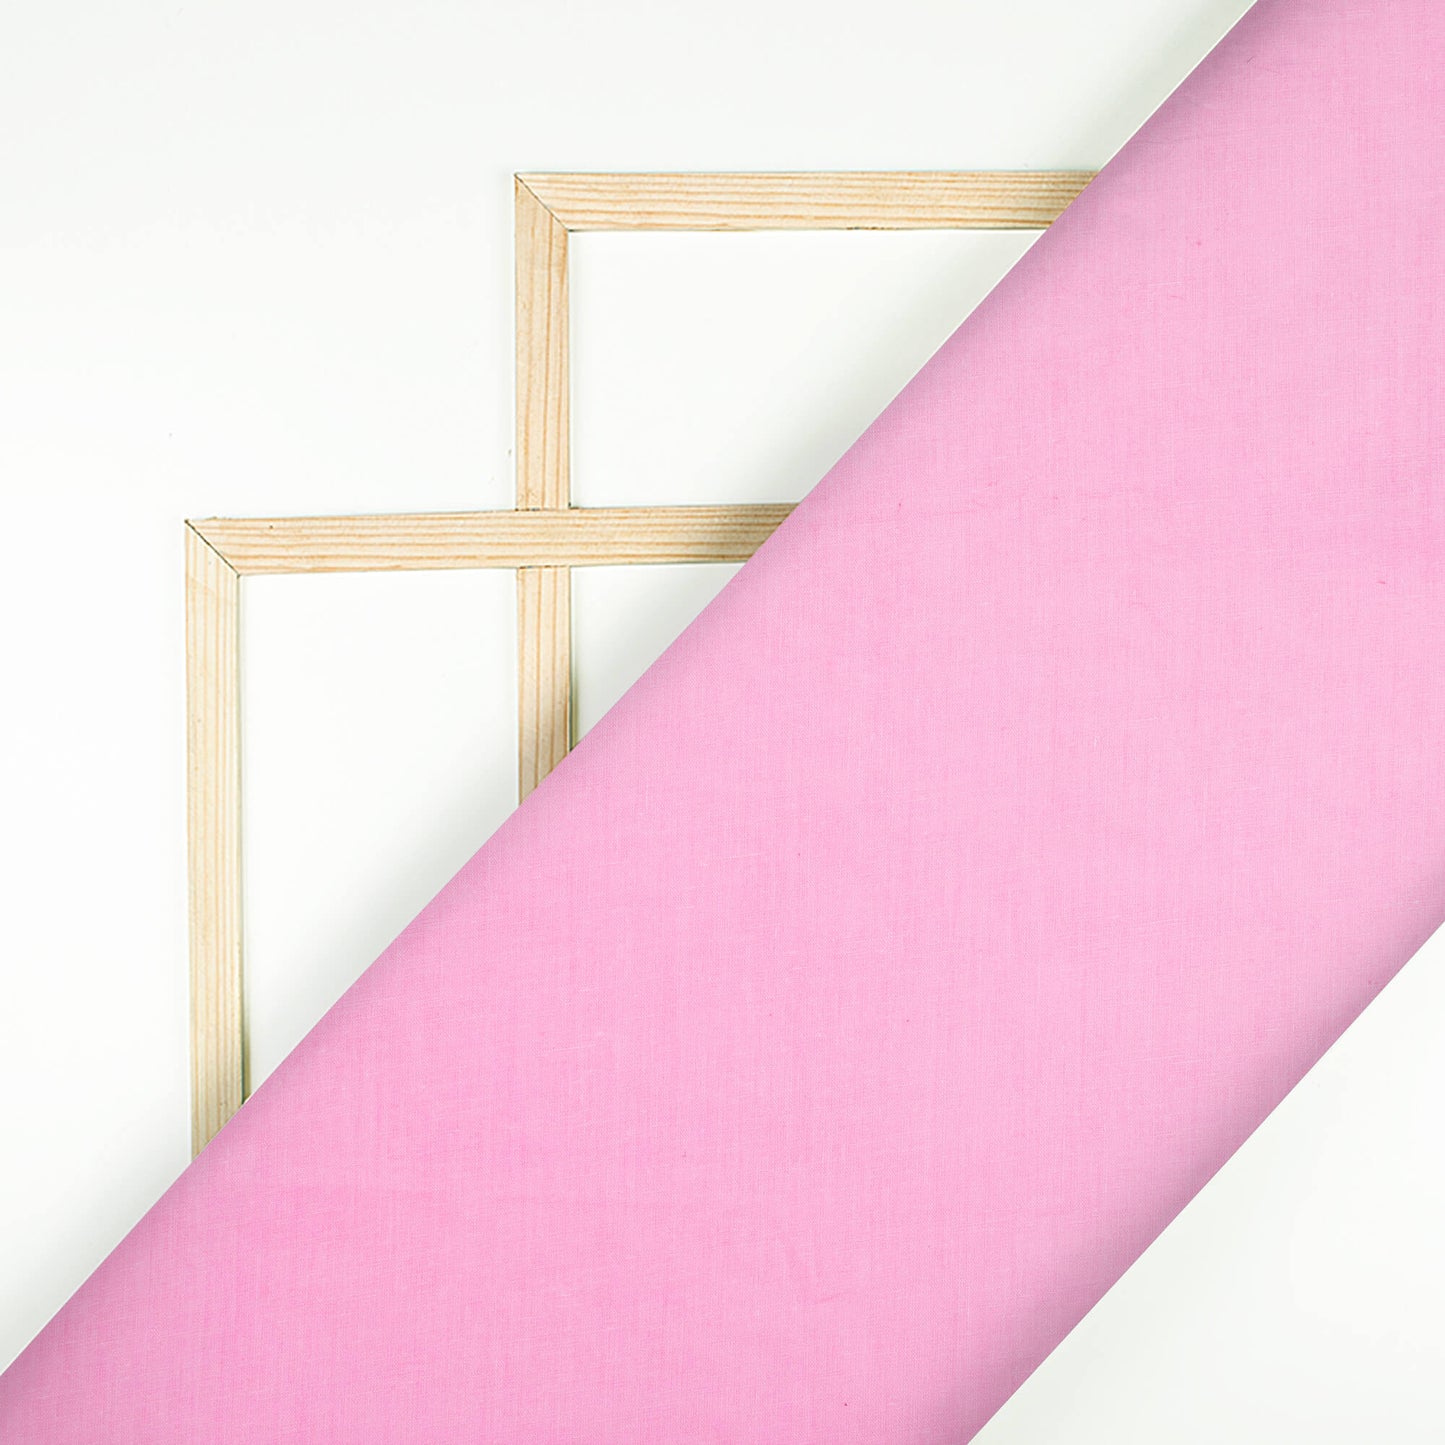 Taffy Pink Plain Cotton Cambric Fabric - Fabcurate